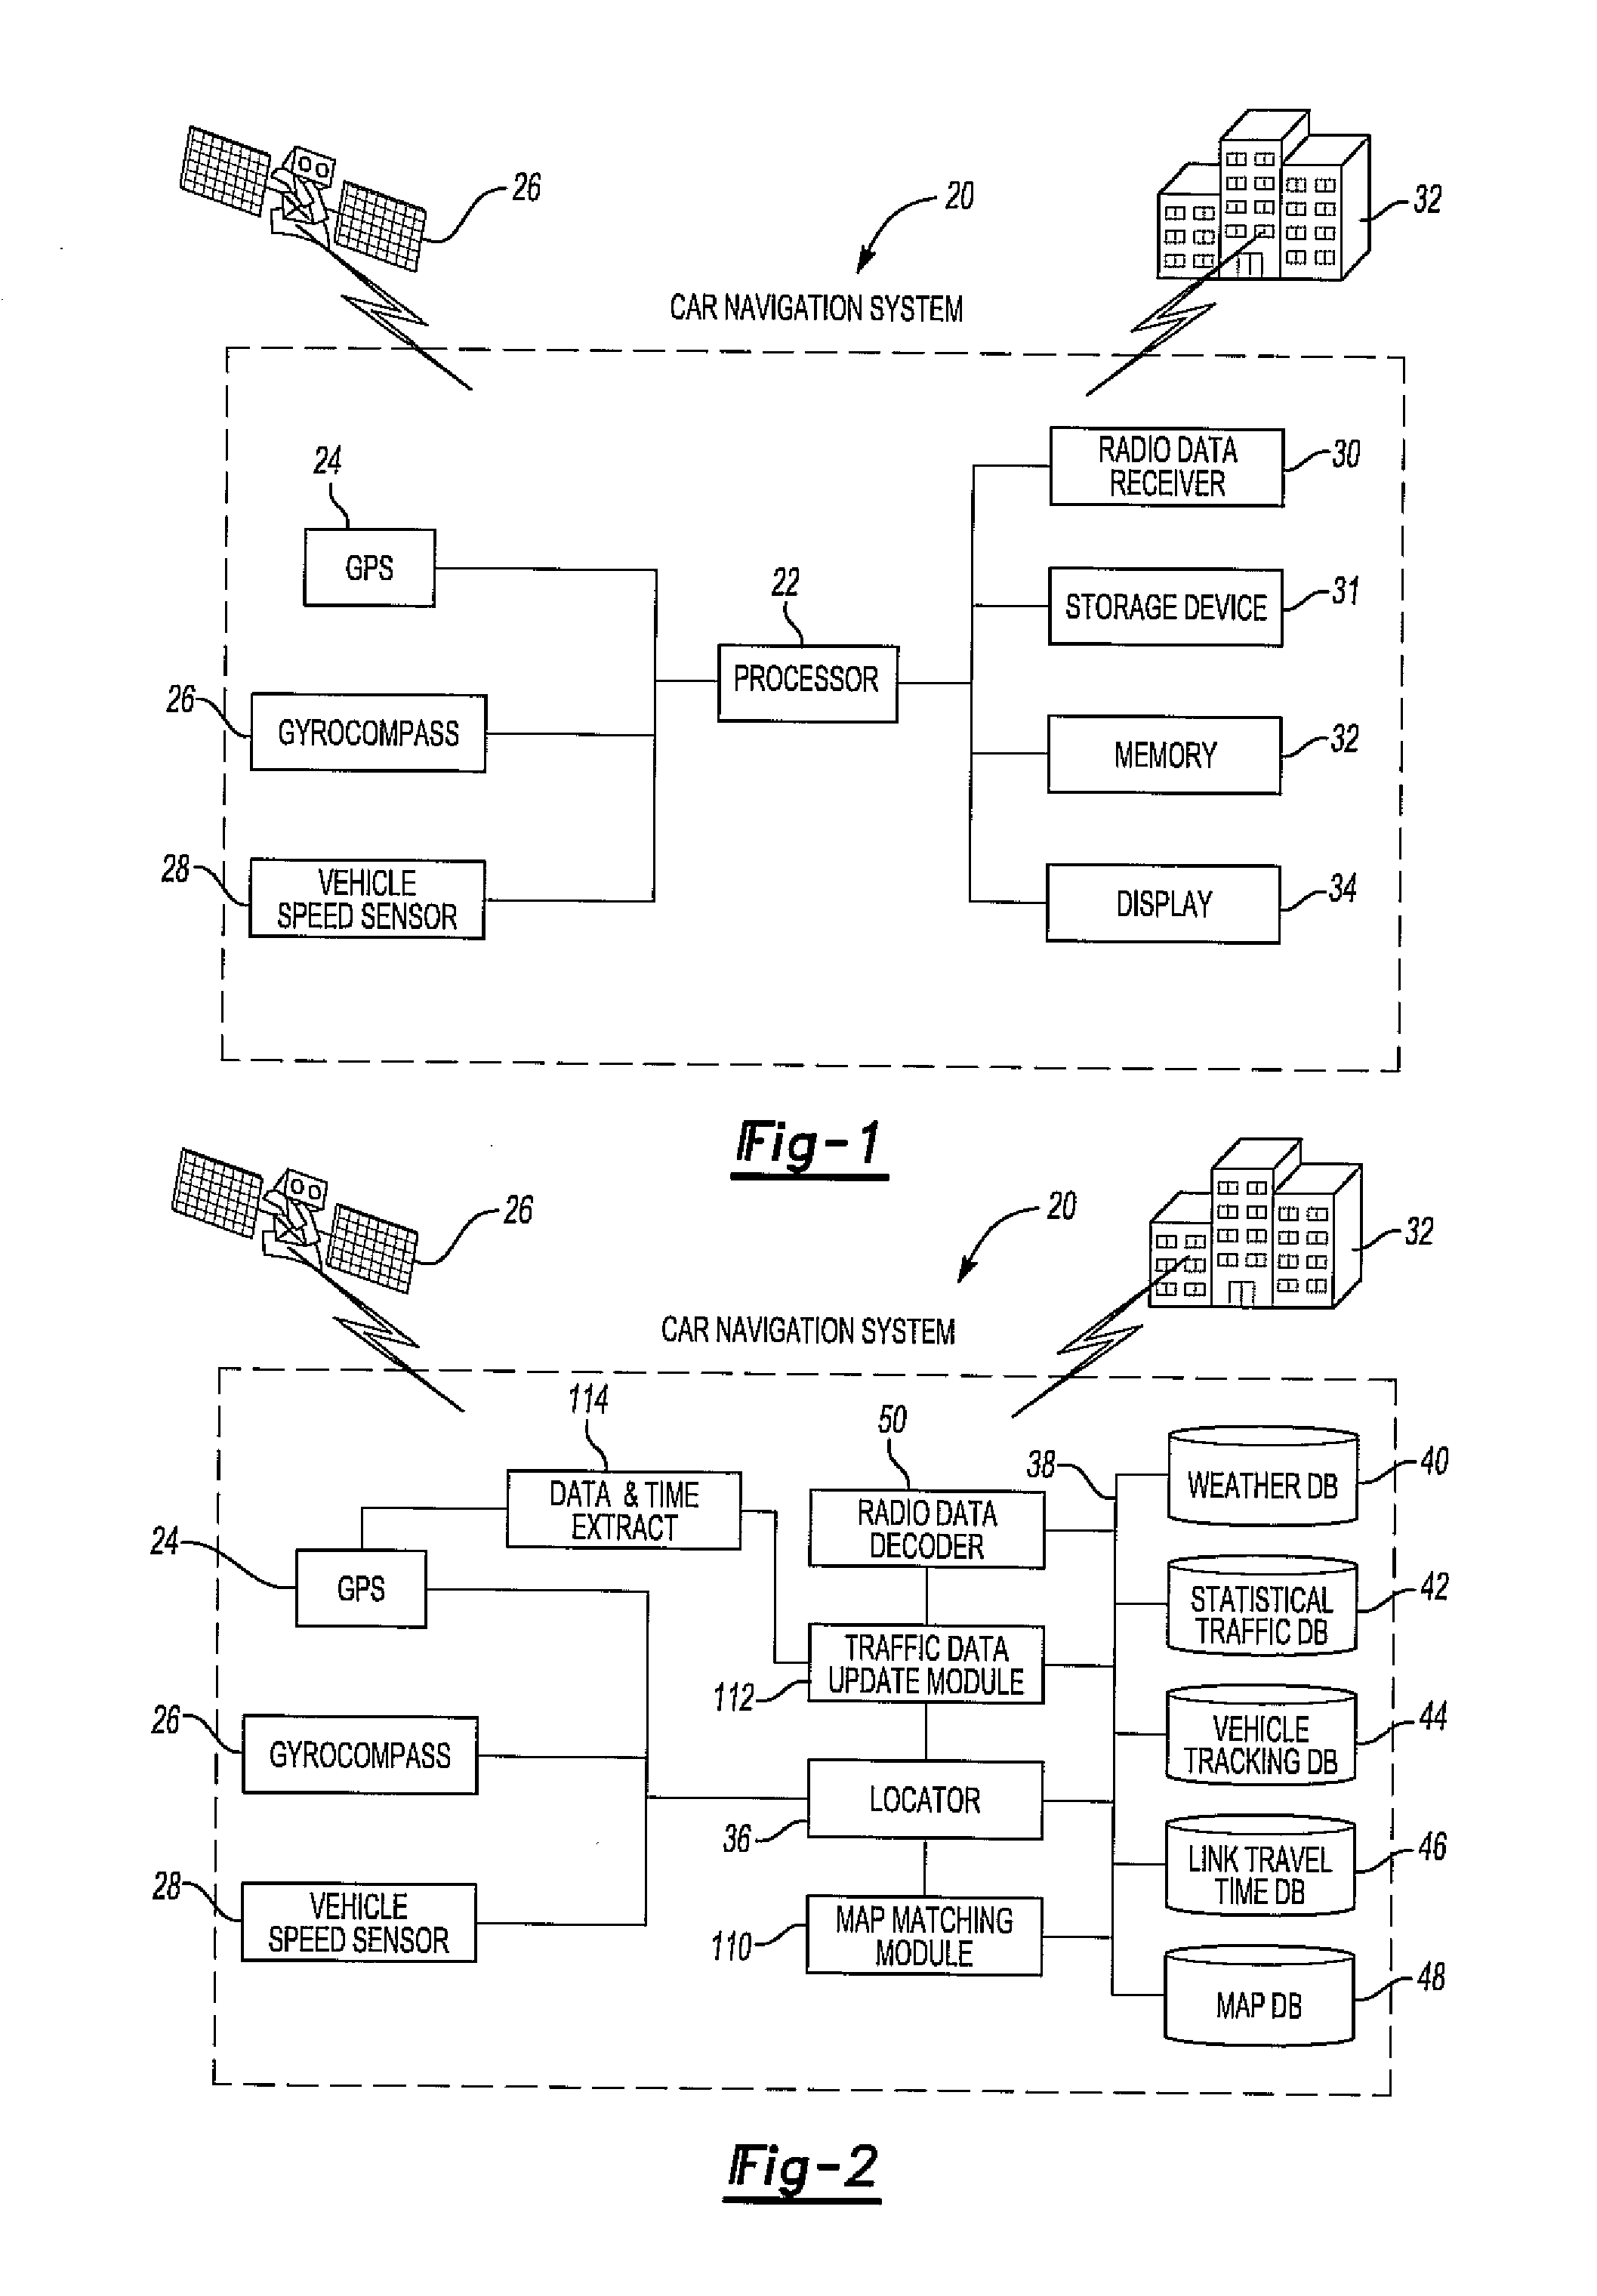 System and method for updating a statistical database in a vehicle navigation system